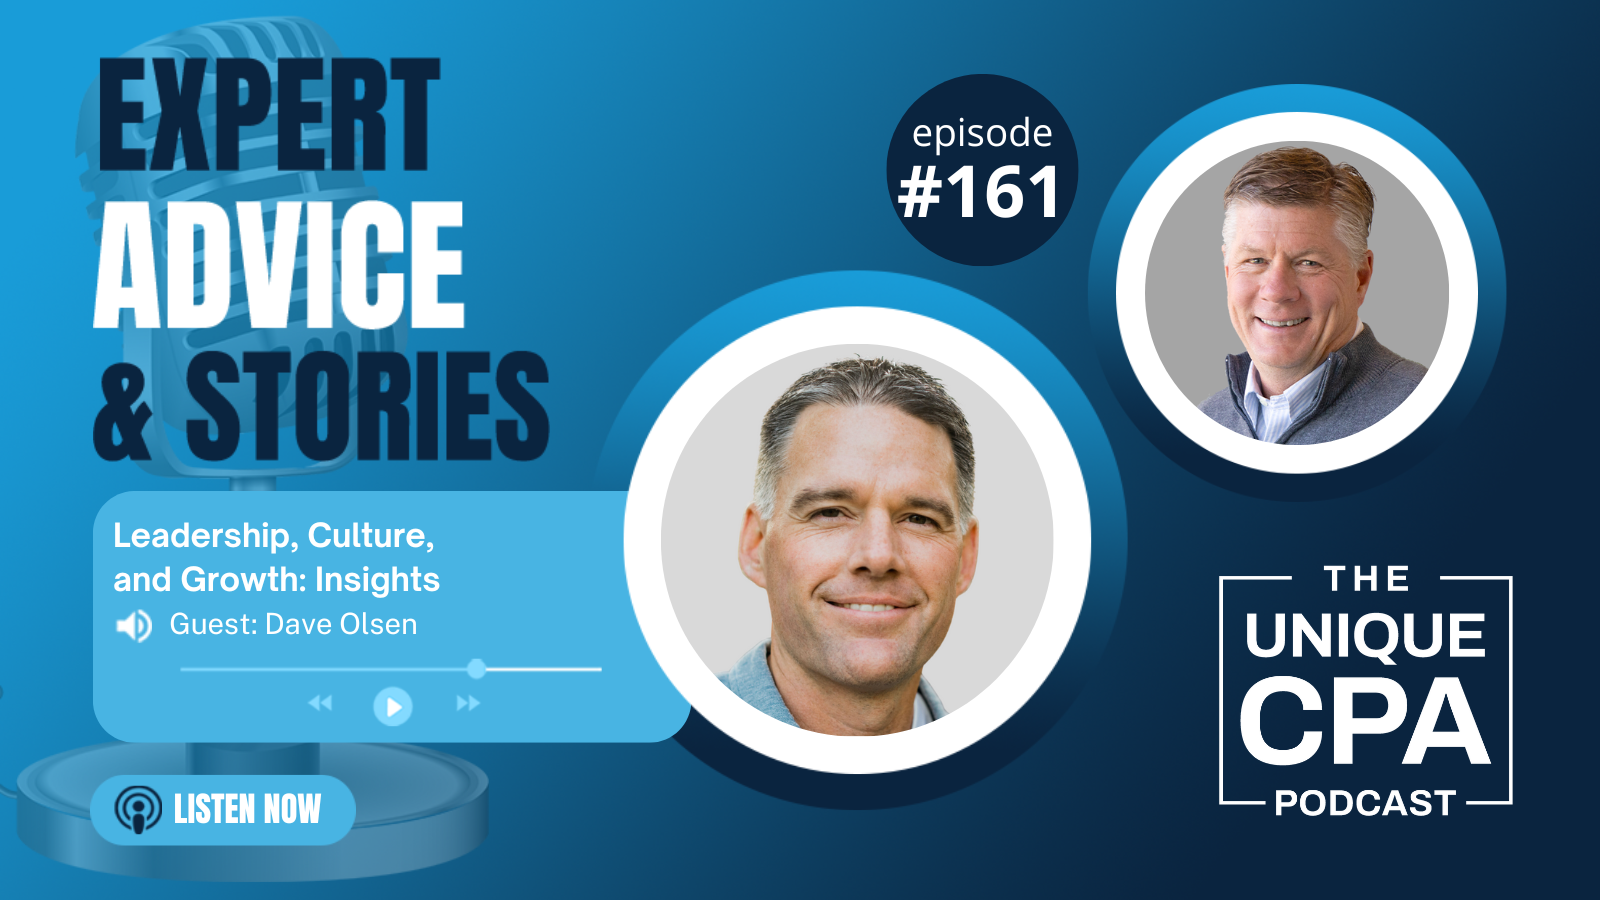 Unique Cpa Featured Image Ep 161 Dave Olsen - Leadership, Culture And Growth - Tri-Merit